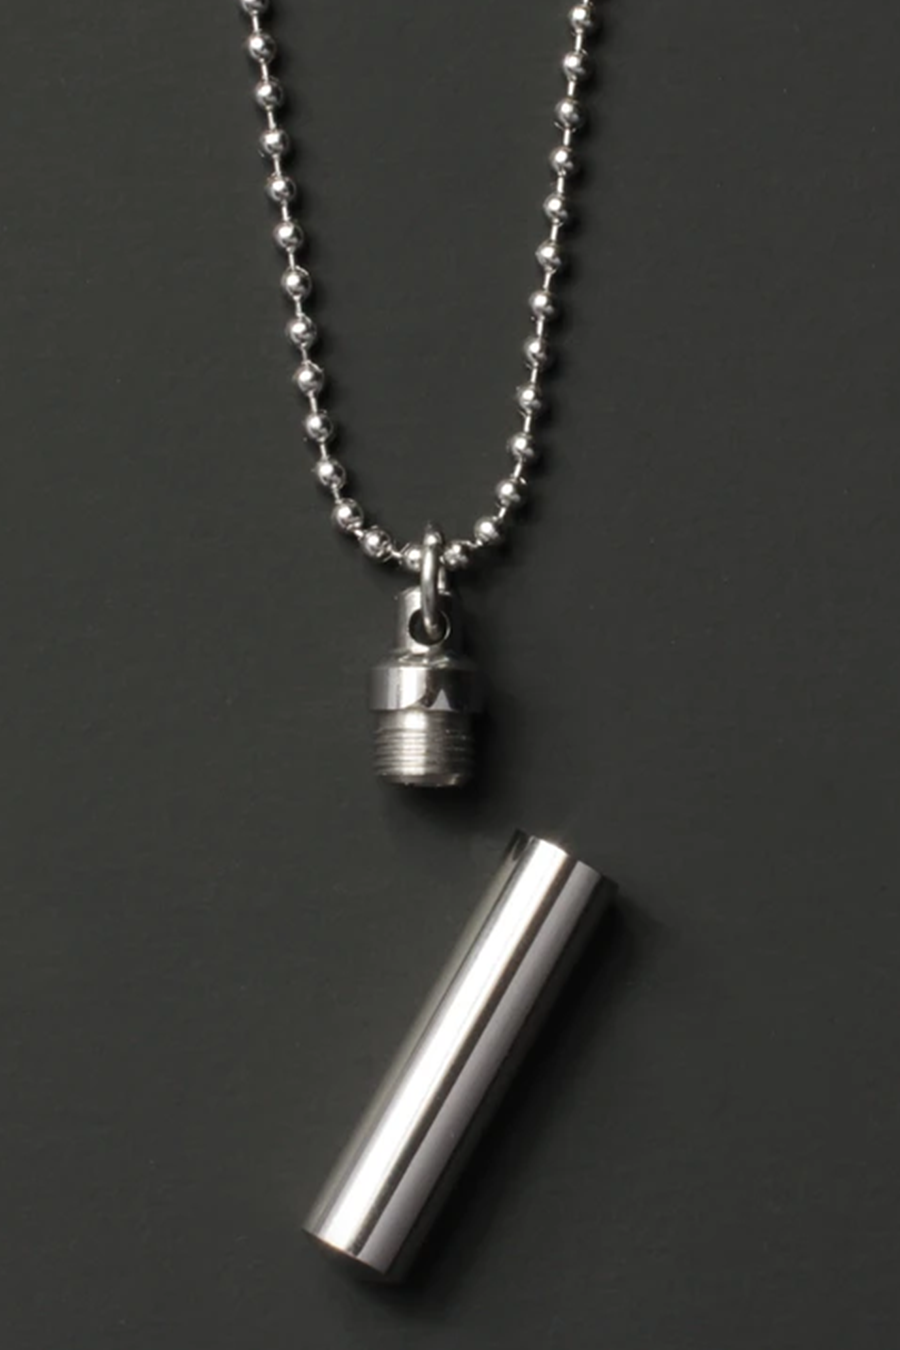 Stainless Steel Vial Necklace - Main Image Number 2 of 2